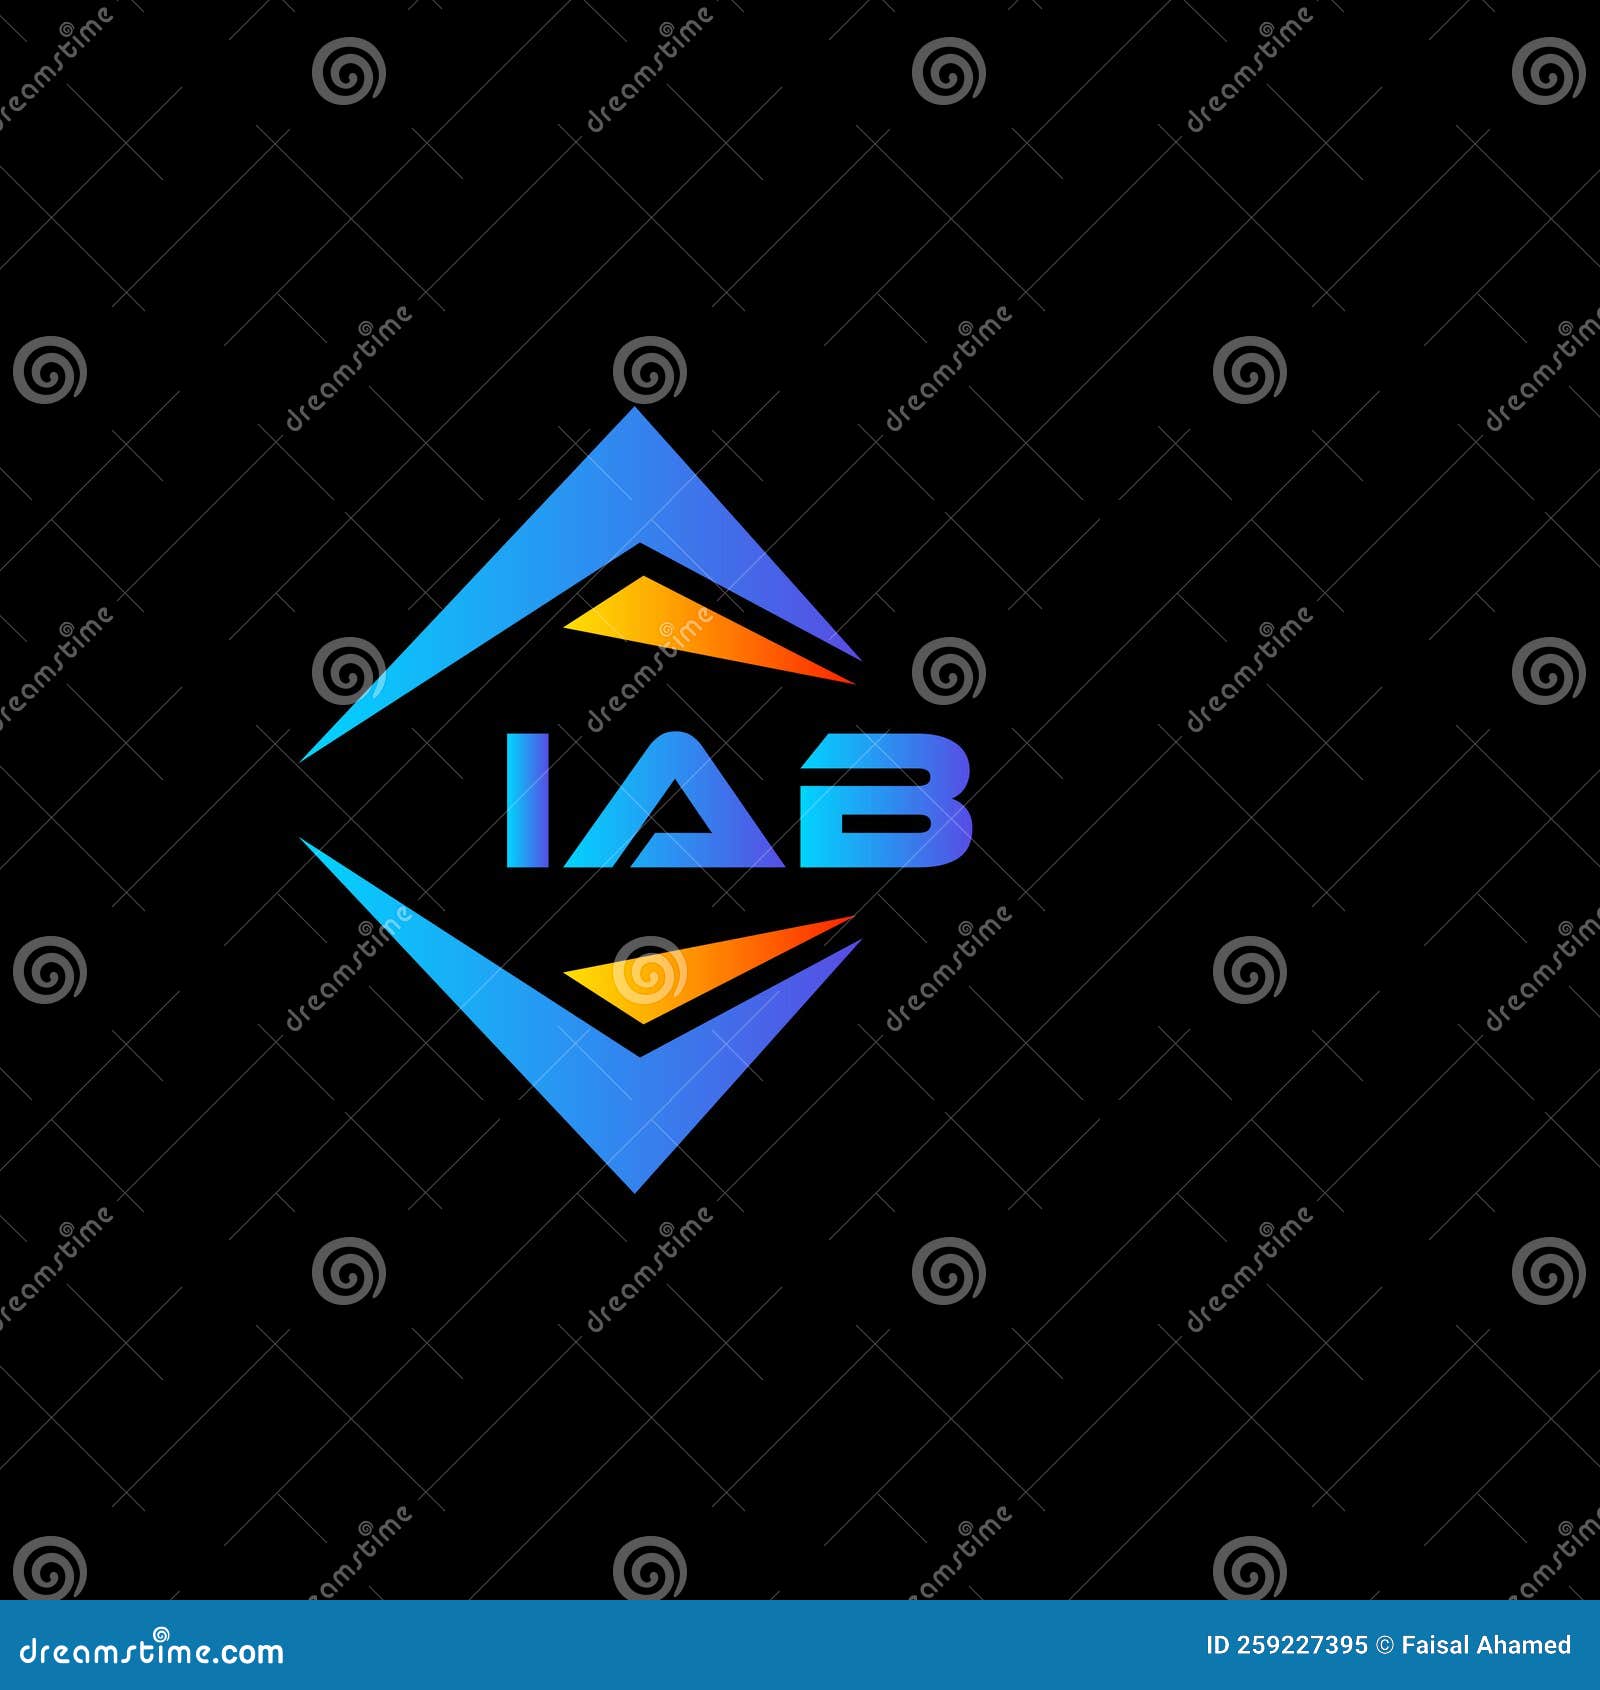 iab abstract technology logo  on black background. iab creative initials letter logo concept